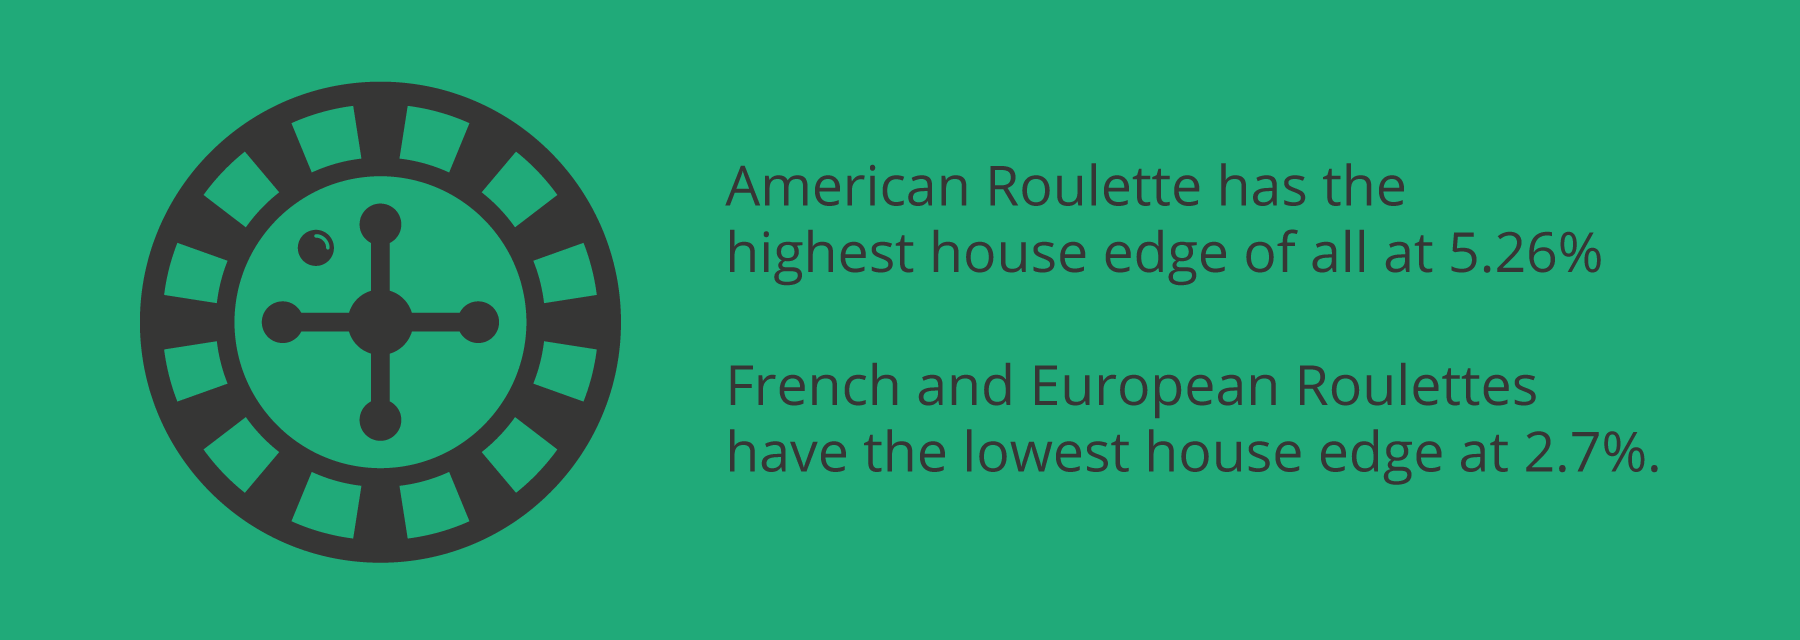 Differences between American Roulette and French Roulette  - Play Roulette Online UAE  - Emirates Casino Roulette Guide Online Roulette Casinos - UAE Casinos